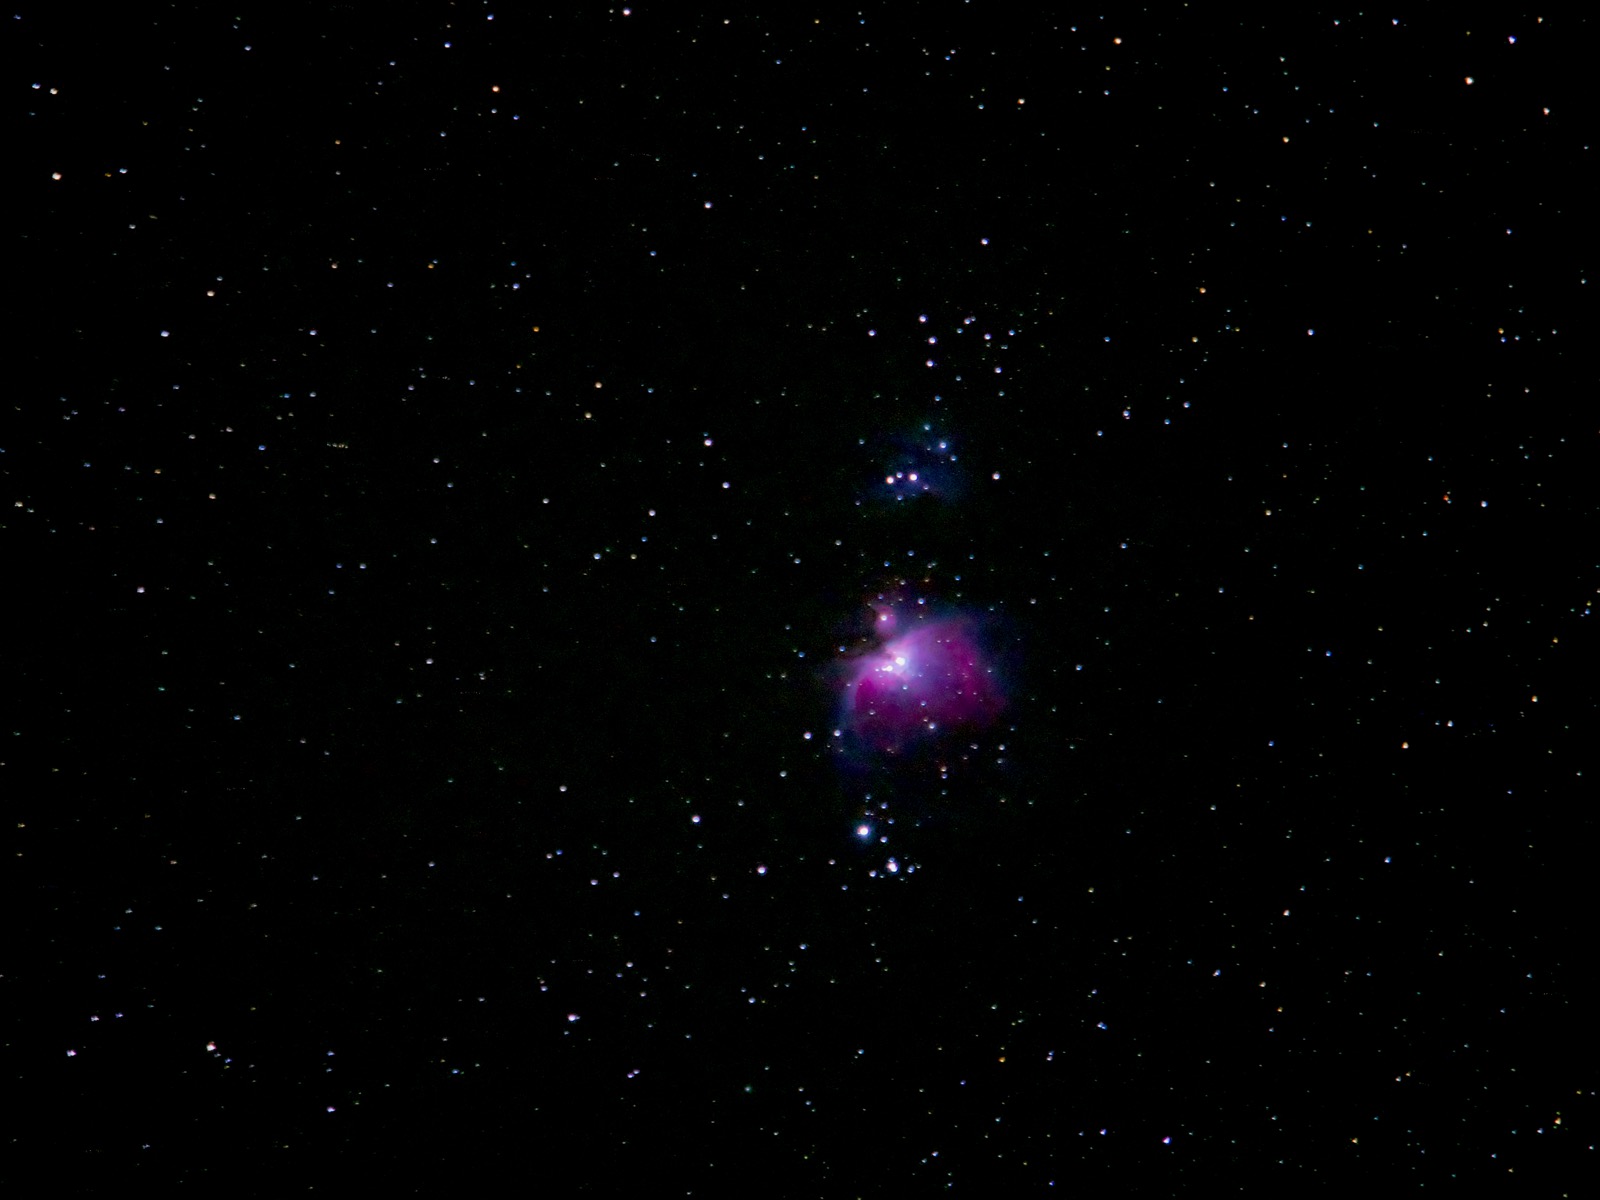 Photo of the Orion Nebula, a small purple-ish fuzzball amid a background of stars